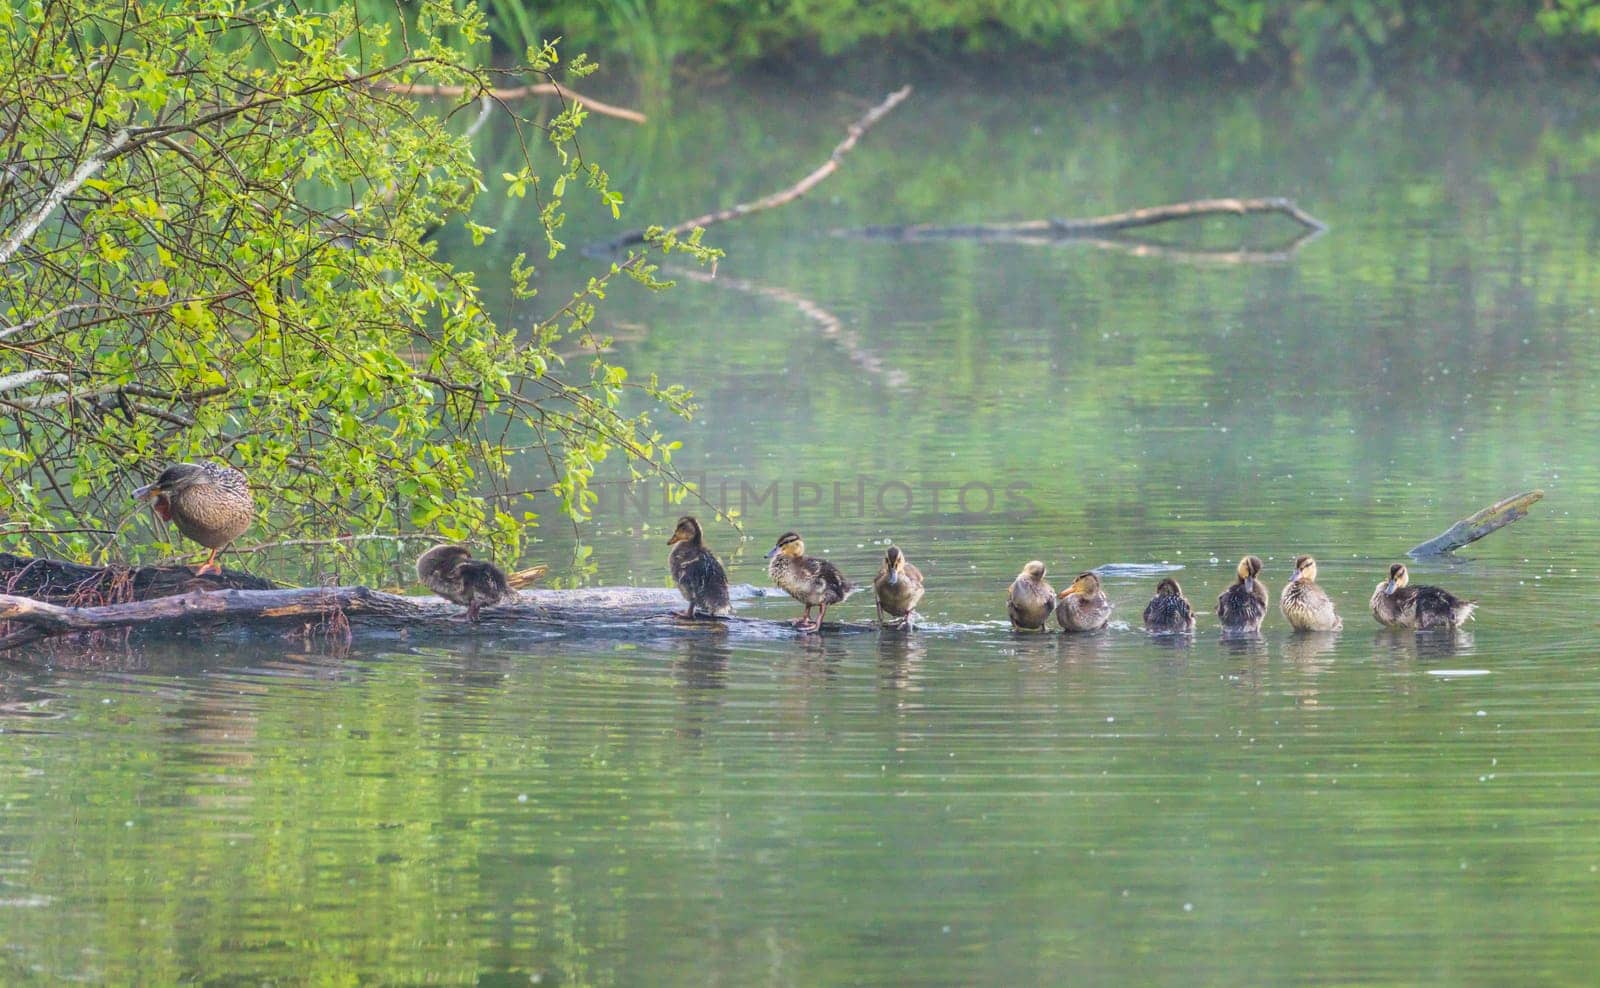 Group of ducklings standing on log in lake at dusk by steheap